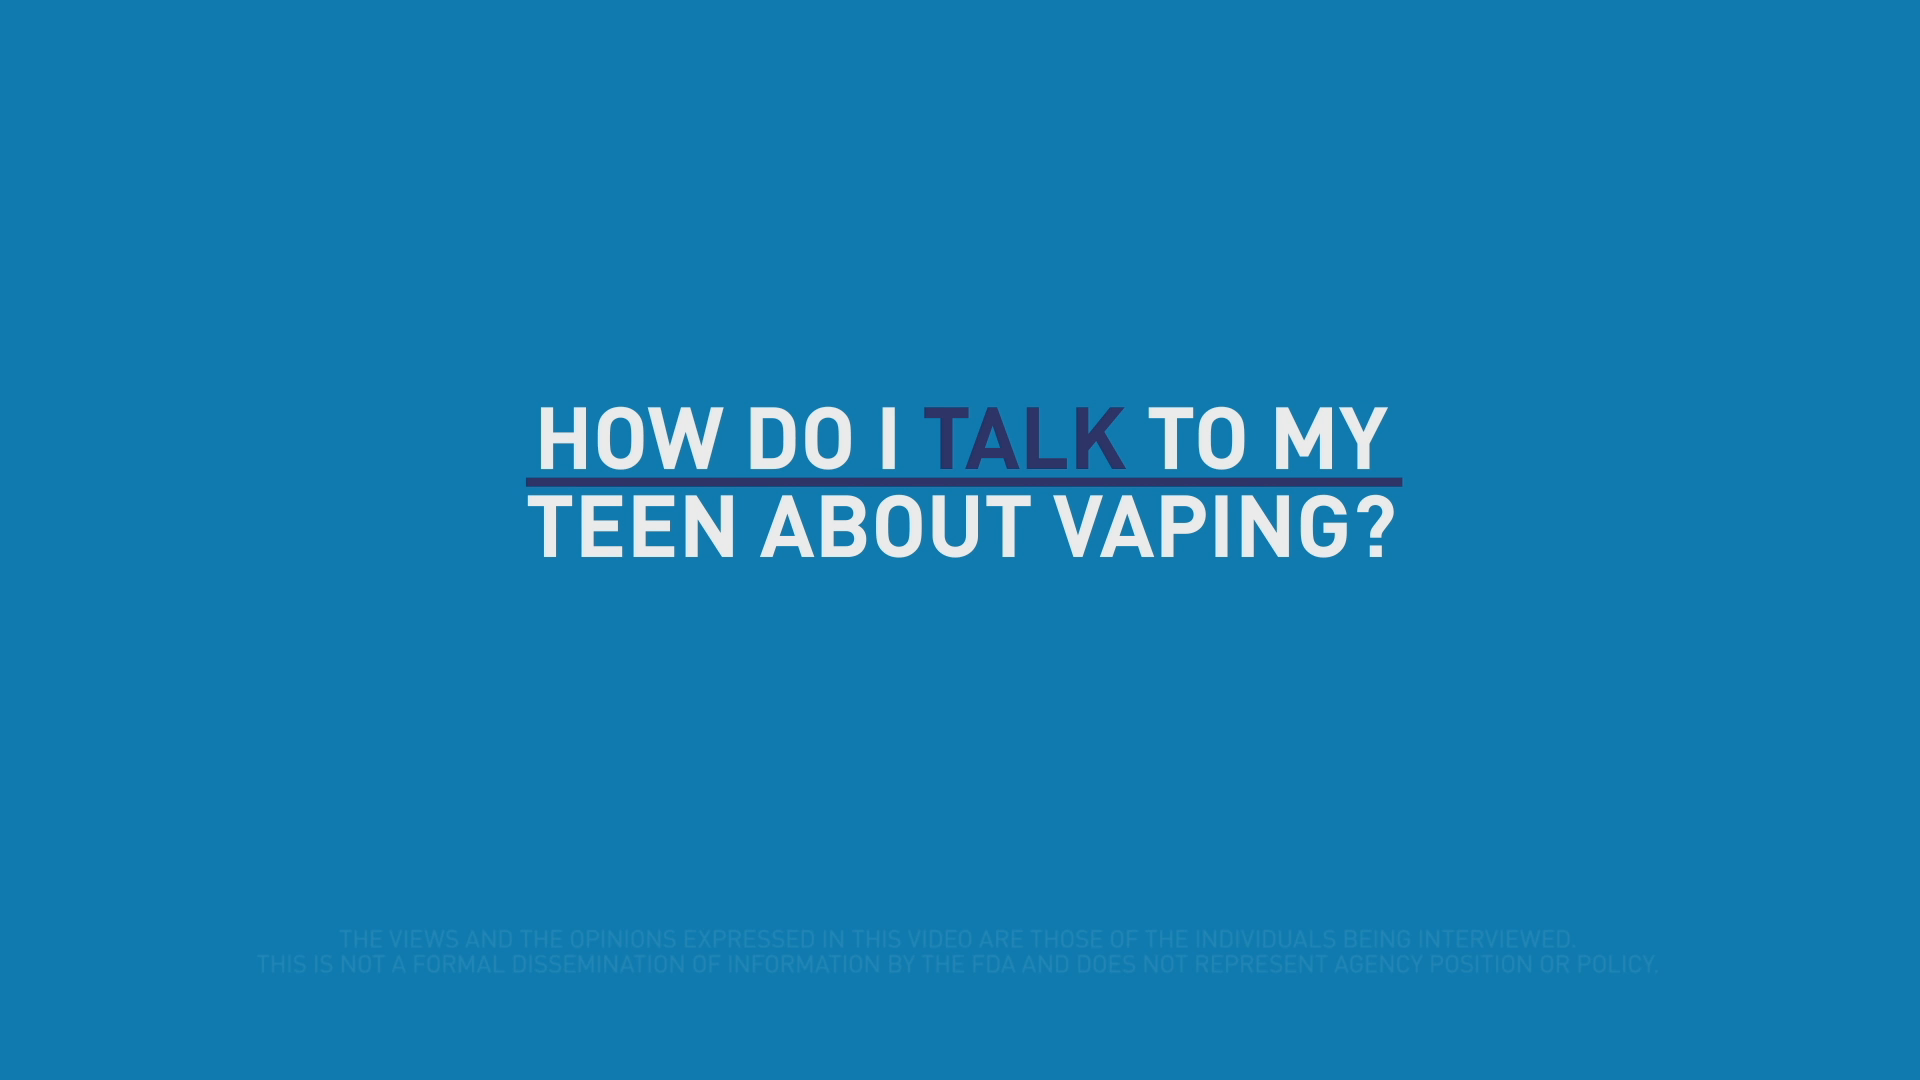 How do you talk to your teen about vaping? In this video from @FDATobacco, pediatricians share tips for starting conversations about e-cigarette use.

For more tobacco education resources for parents and teachers, visit: https://digitalmedia.hhs.gov/tobacco/educator_hub?utm_source=CTPPartnerTwitter&utm_medium=social&utm_campaign=ctp-terl